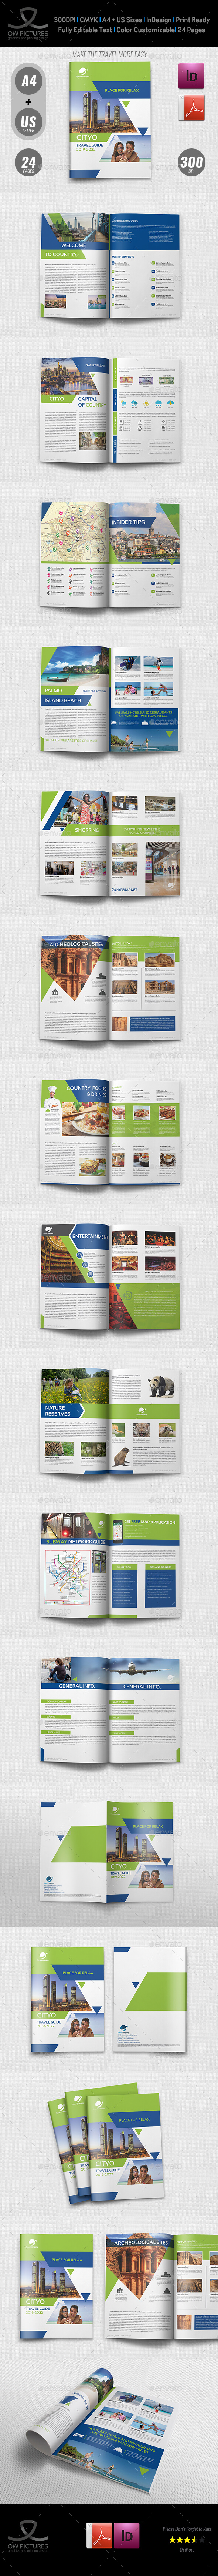 Travel Guide Graphics, Designs & Templates From Graphicriver Inside Travel Guide Brochure Template